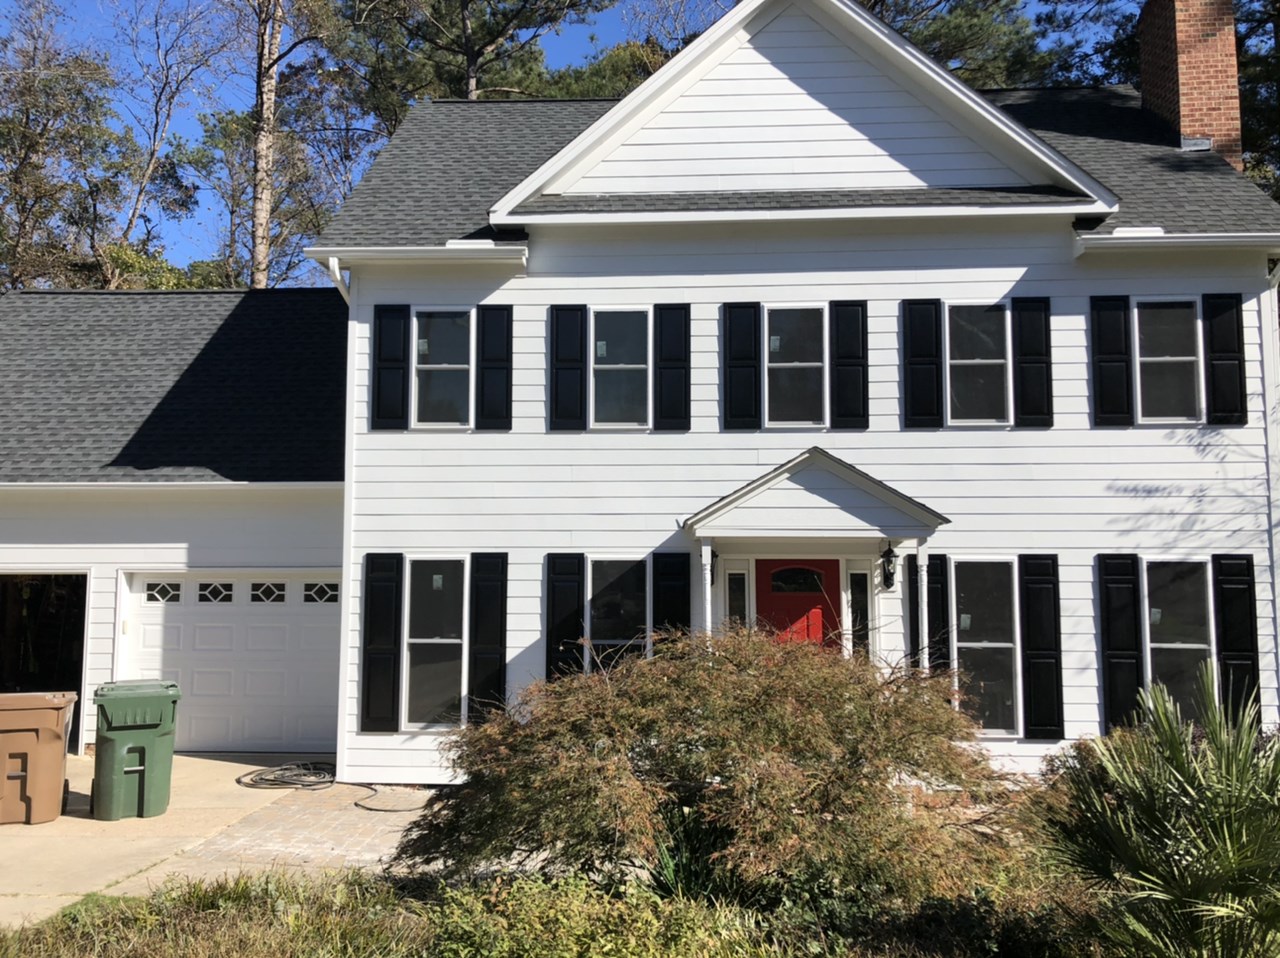 Mark & Kathleen R. – Cary James Hardie Siding Replacement